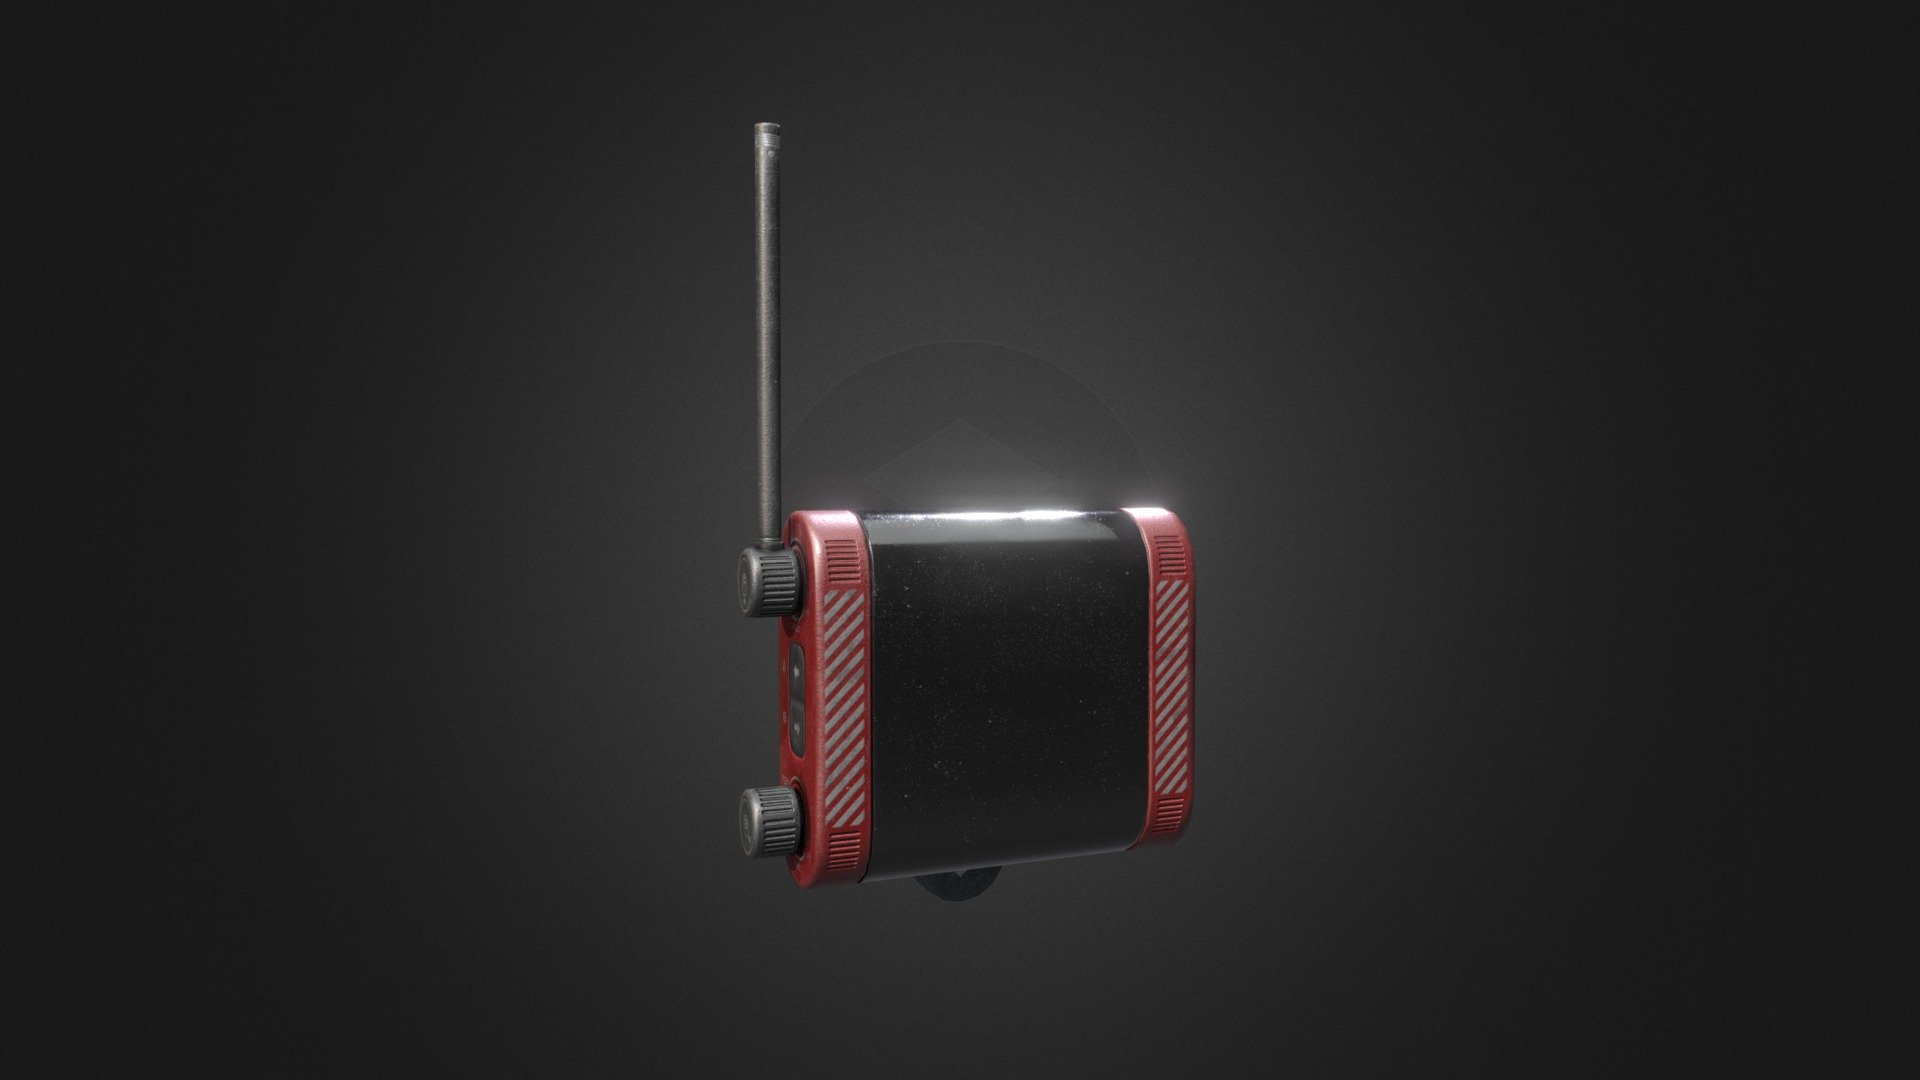 TVC waves Transmitter in sci-fi style. Hello world! I create this little model for sketchfab testing. I hope you like it! - Transmitter (PBR) - 3D model by Anton Berkov (@northhive) 3d model